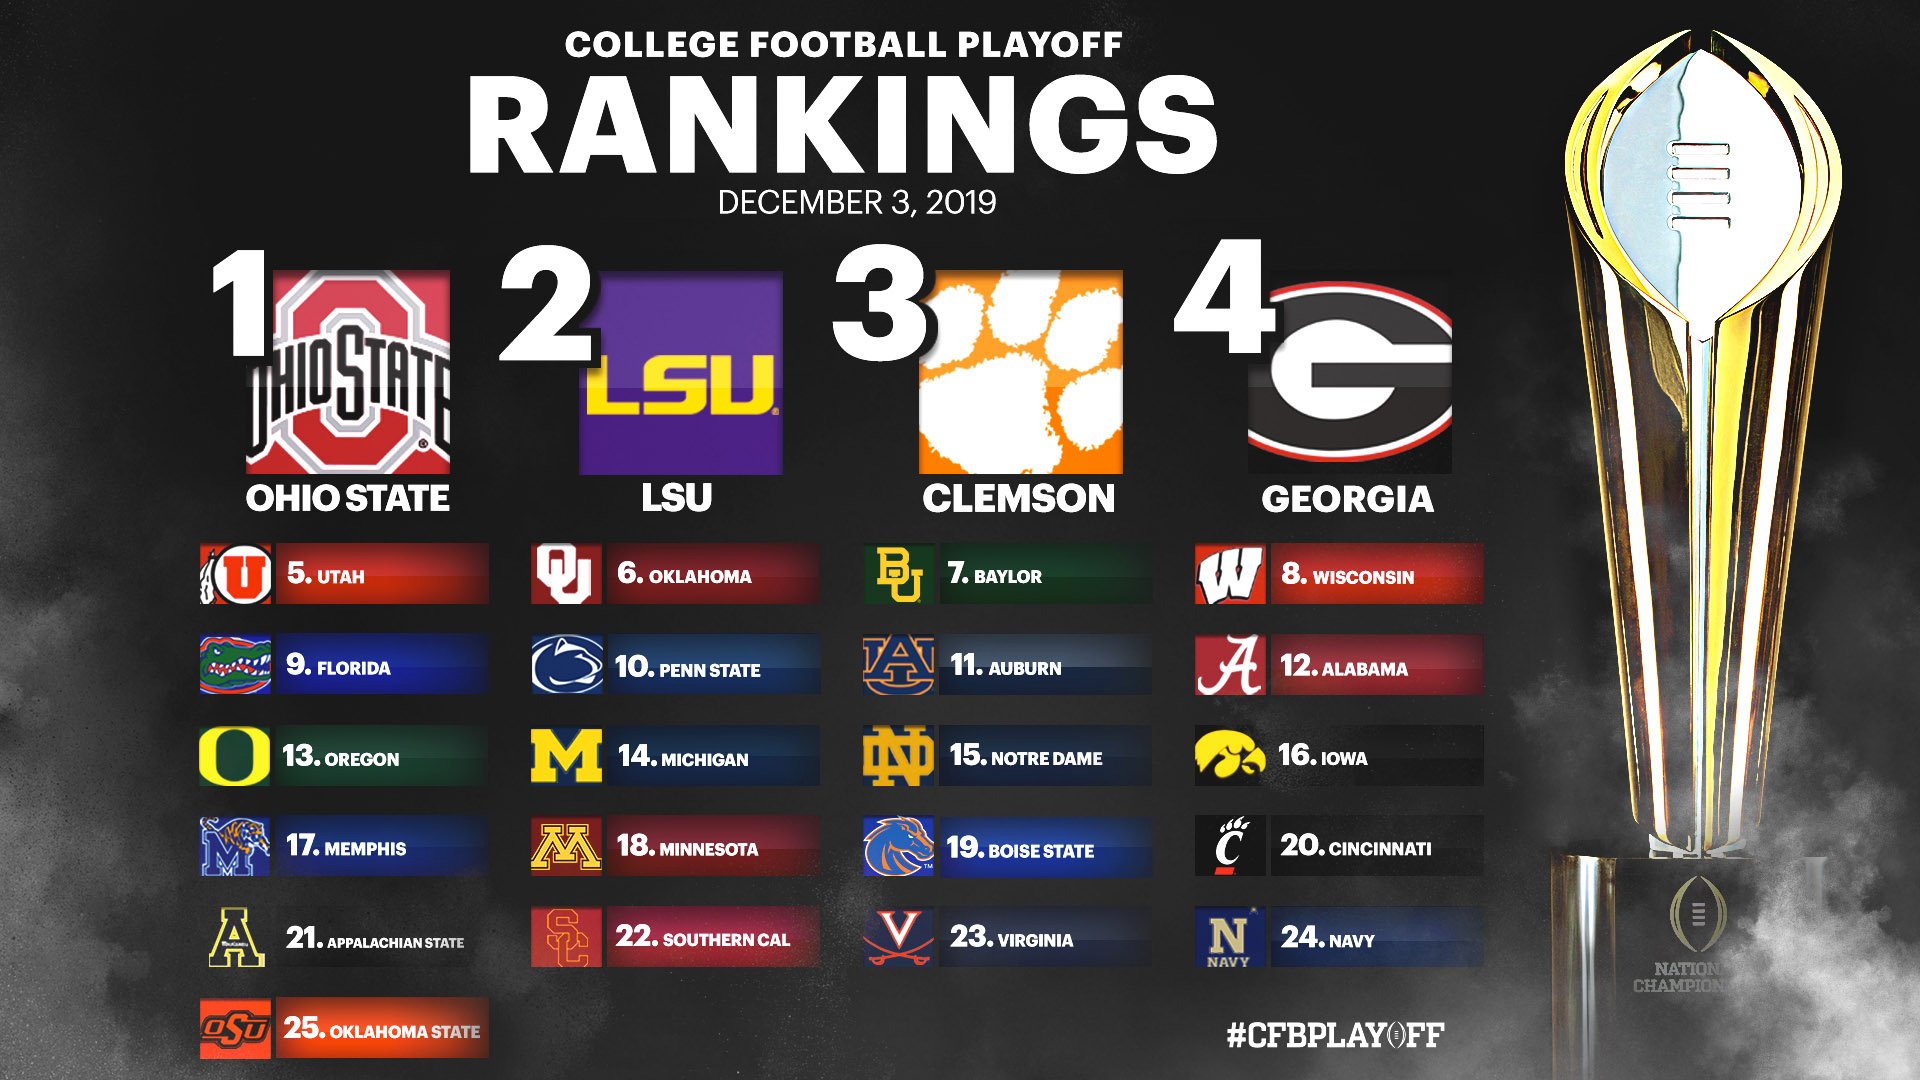 College Football Championship Weekend Preview + Life & Content Update